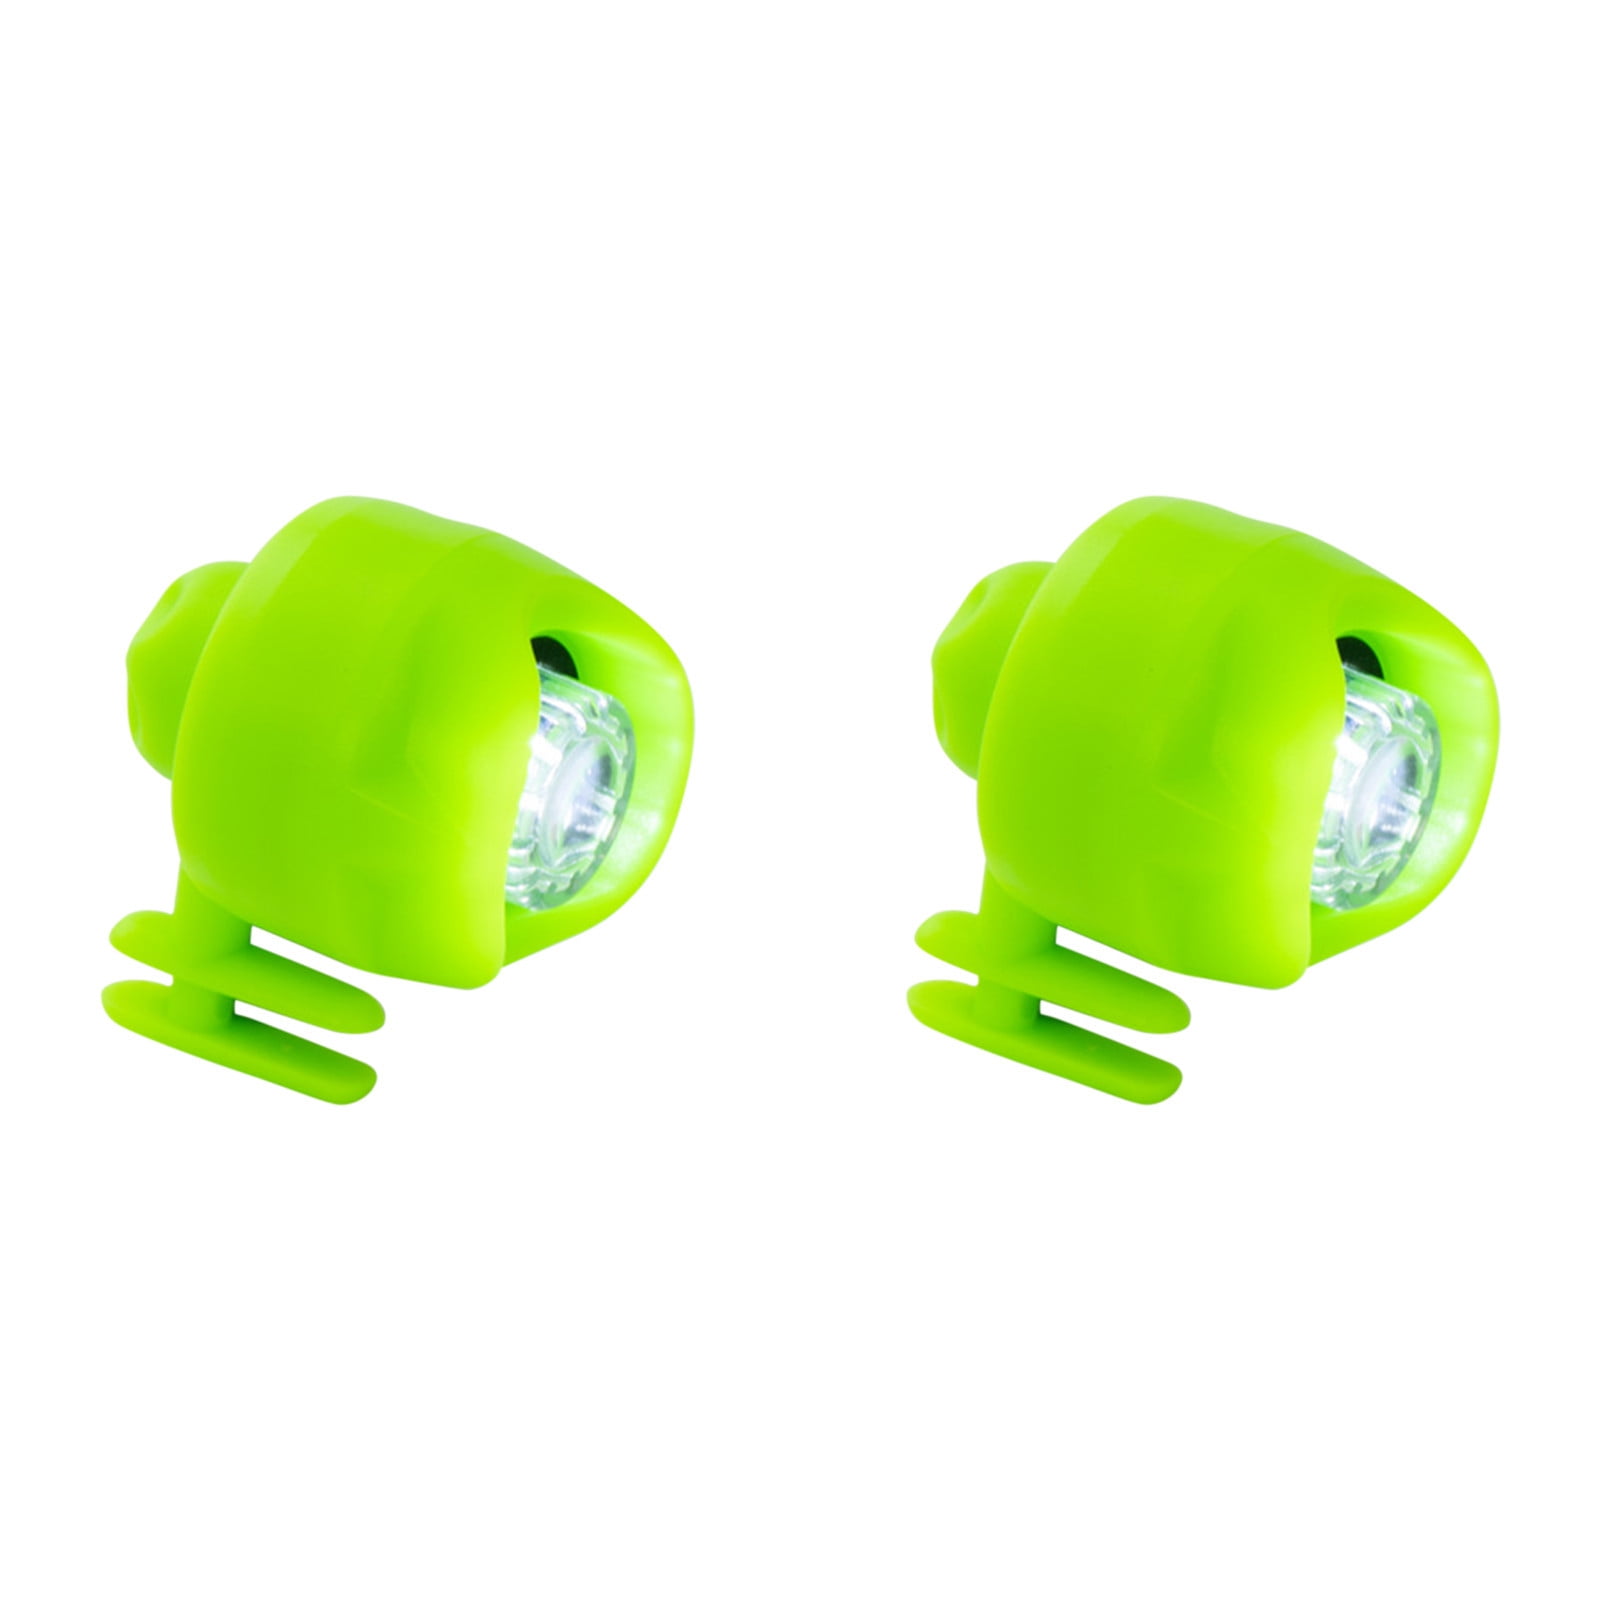 AURIGATE Headlights for Shoes,Rechargeable 2Pcs LED Light for Clogs ...